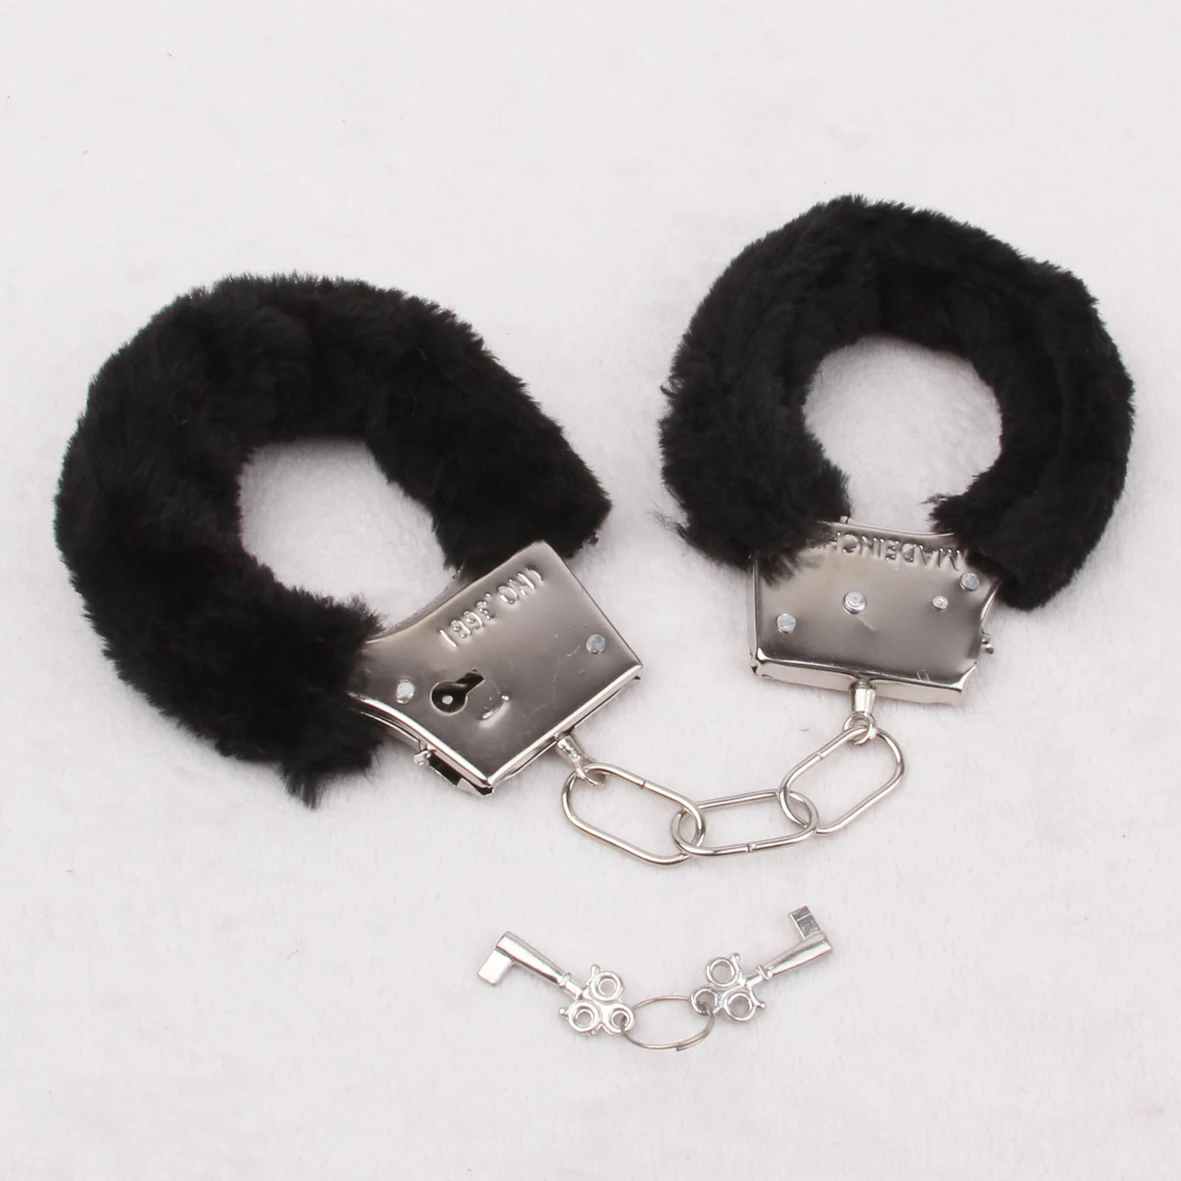 Role Play Adult Game Sexy Toys Fur Bondage Handcuffs Buy Sex Toy Handcuffsrole Play Handcuffs